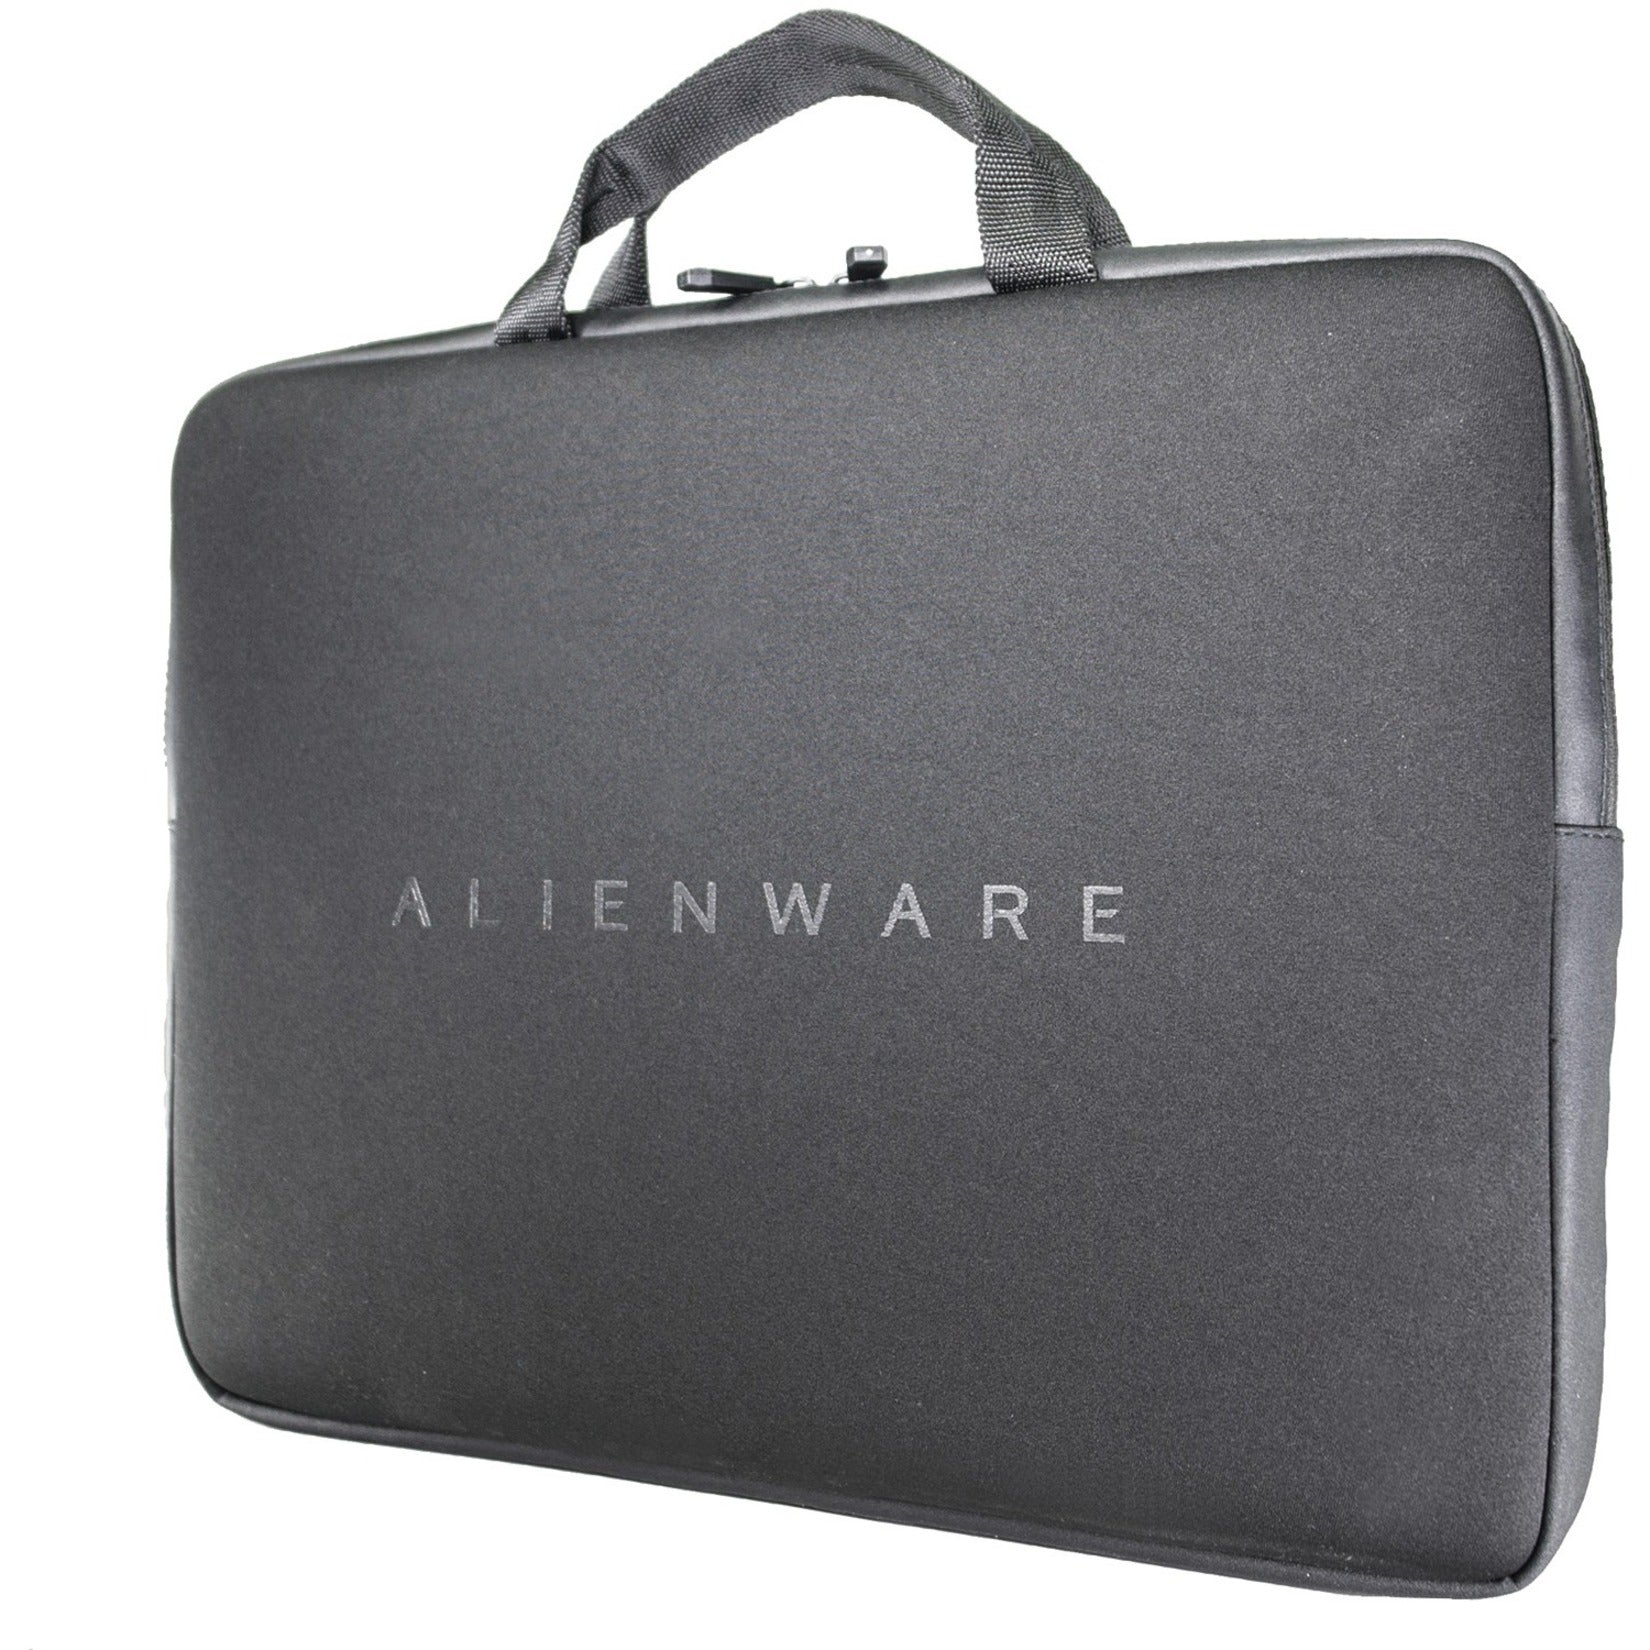 Mobile Edge AWM15SL Alienware m15 Sleeve, Carrying Case for 15" Dell Notebook - Black